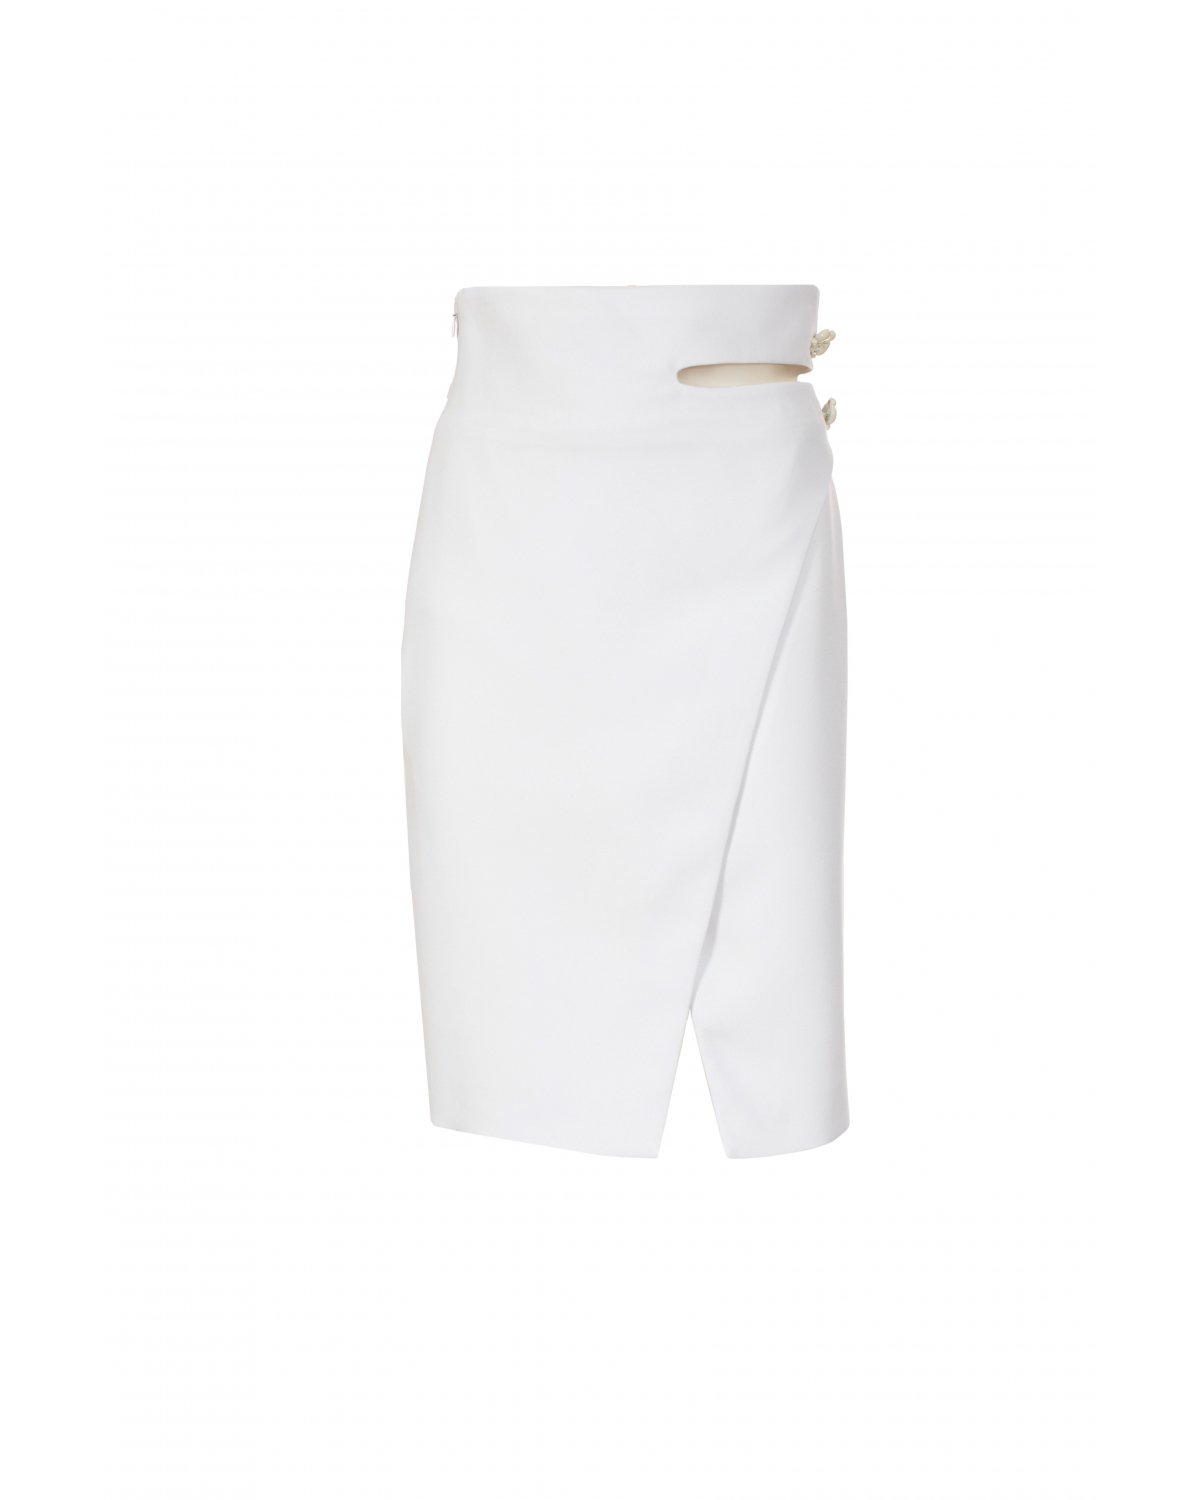 Surplice white skirt with buttons | 73_74 | Genny